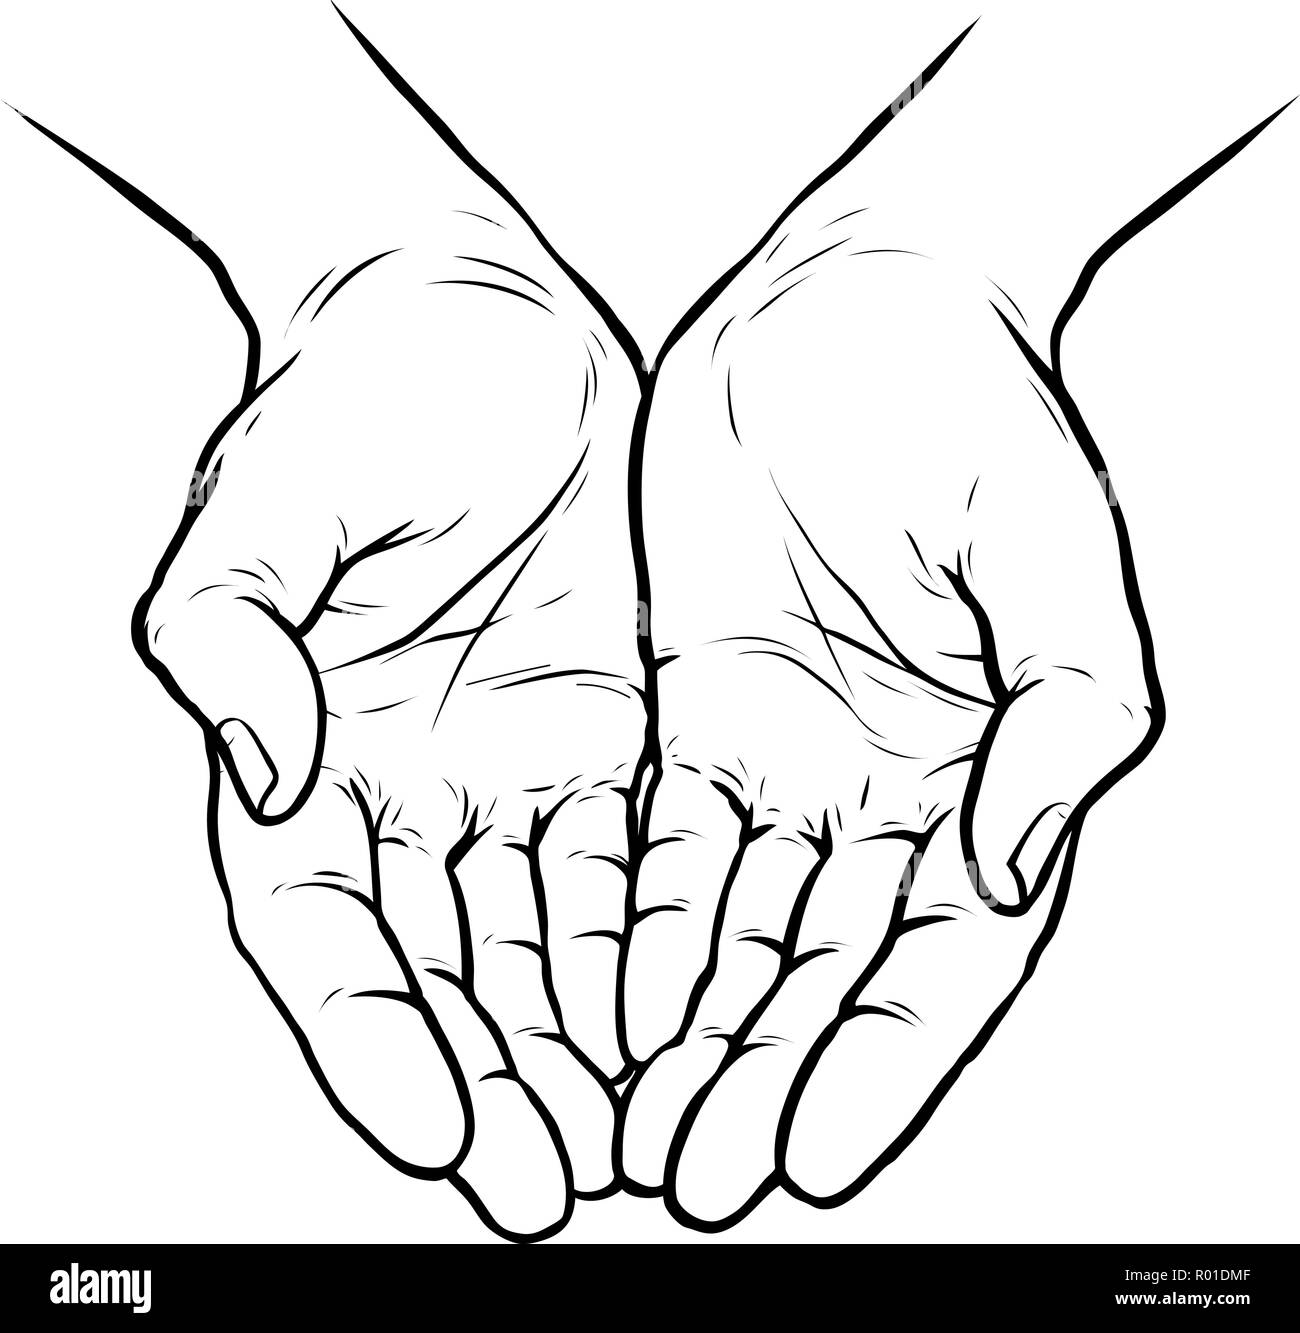 Hands cupped together. Sketch vector illustration isolated on white background Stock Vector